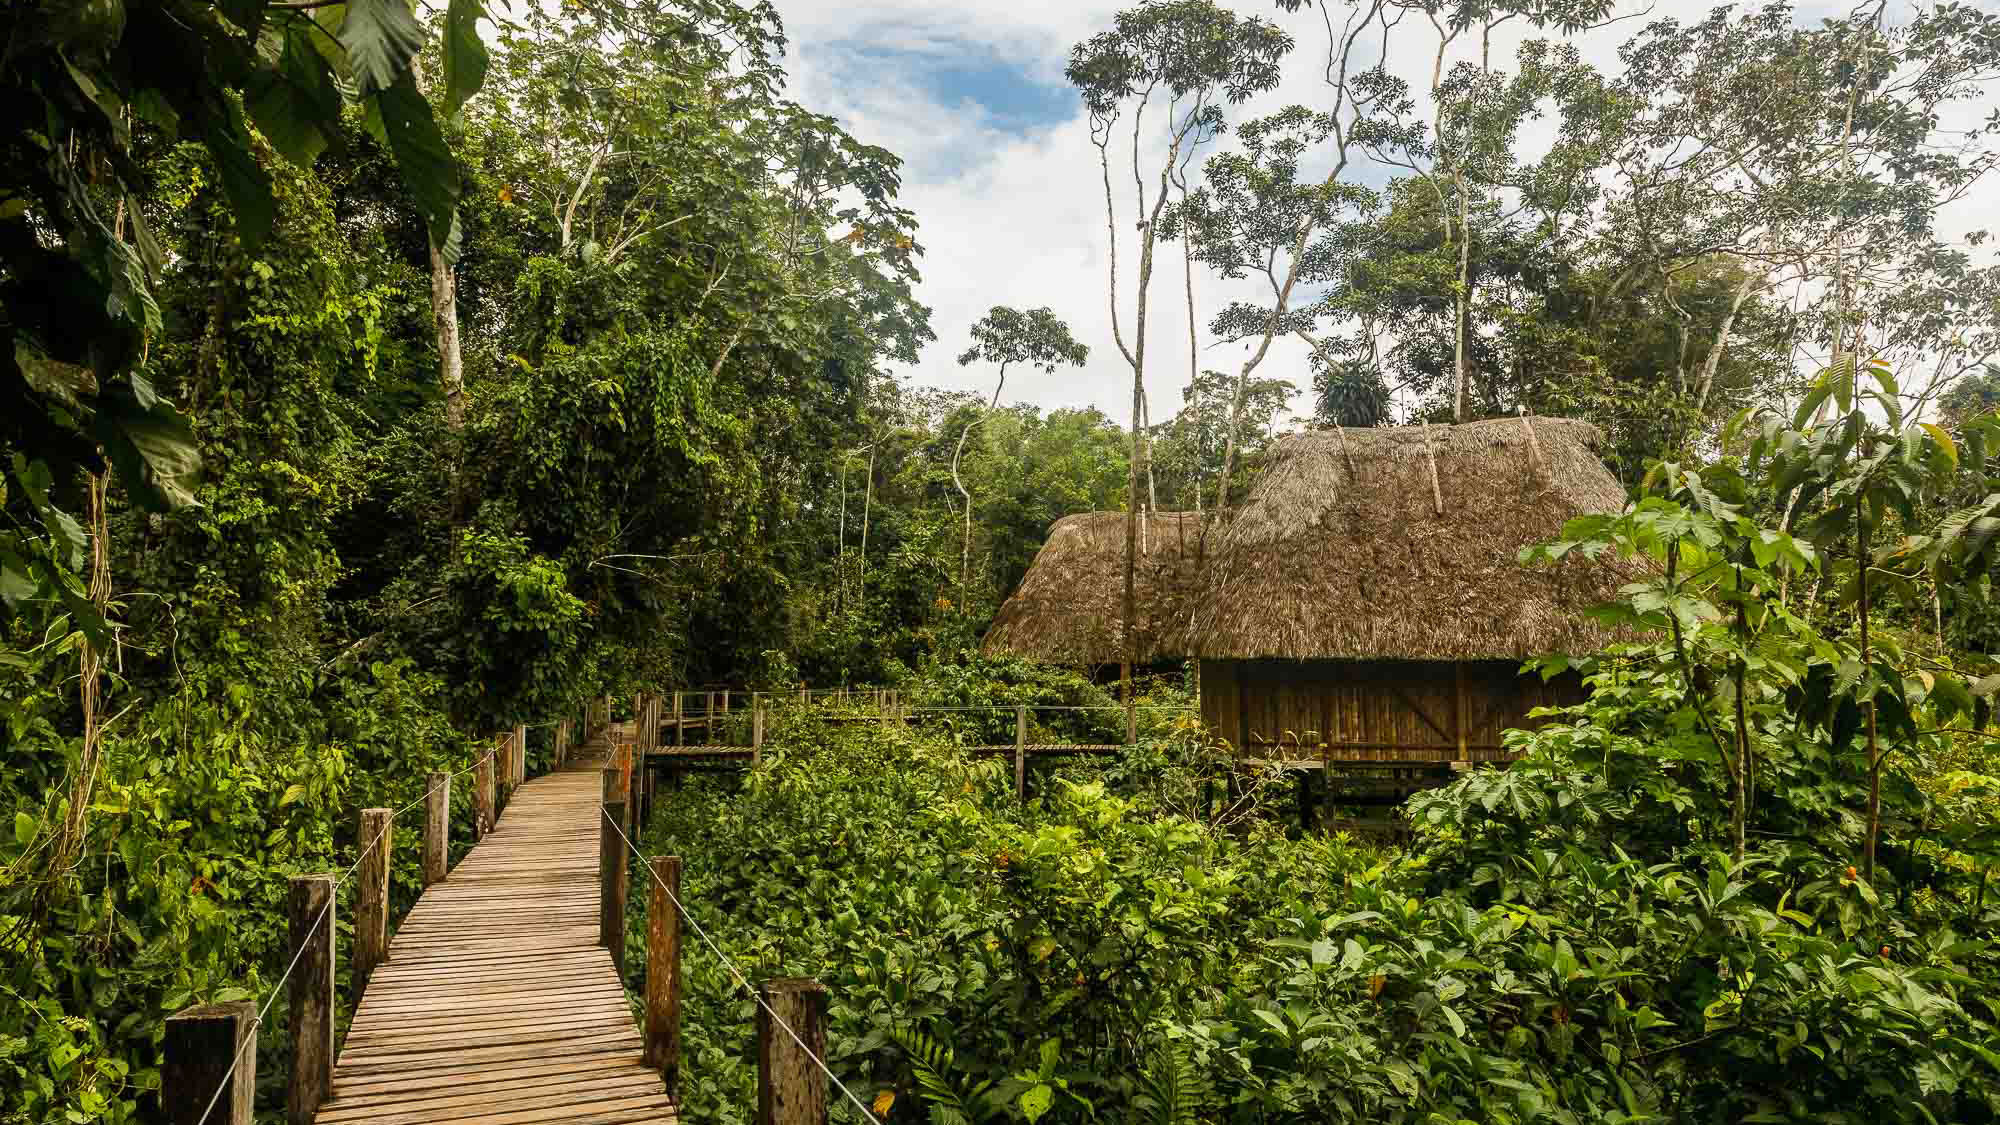 Kapawi features 10 simple yet stylish bungalows built with Achuar architecture and technology.  A raised boardwalk connects each with the lodge's main gathering hut.